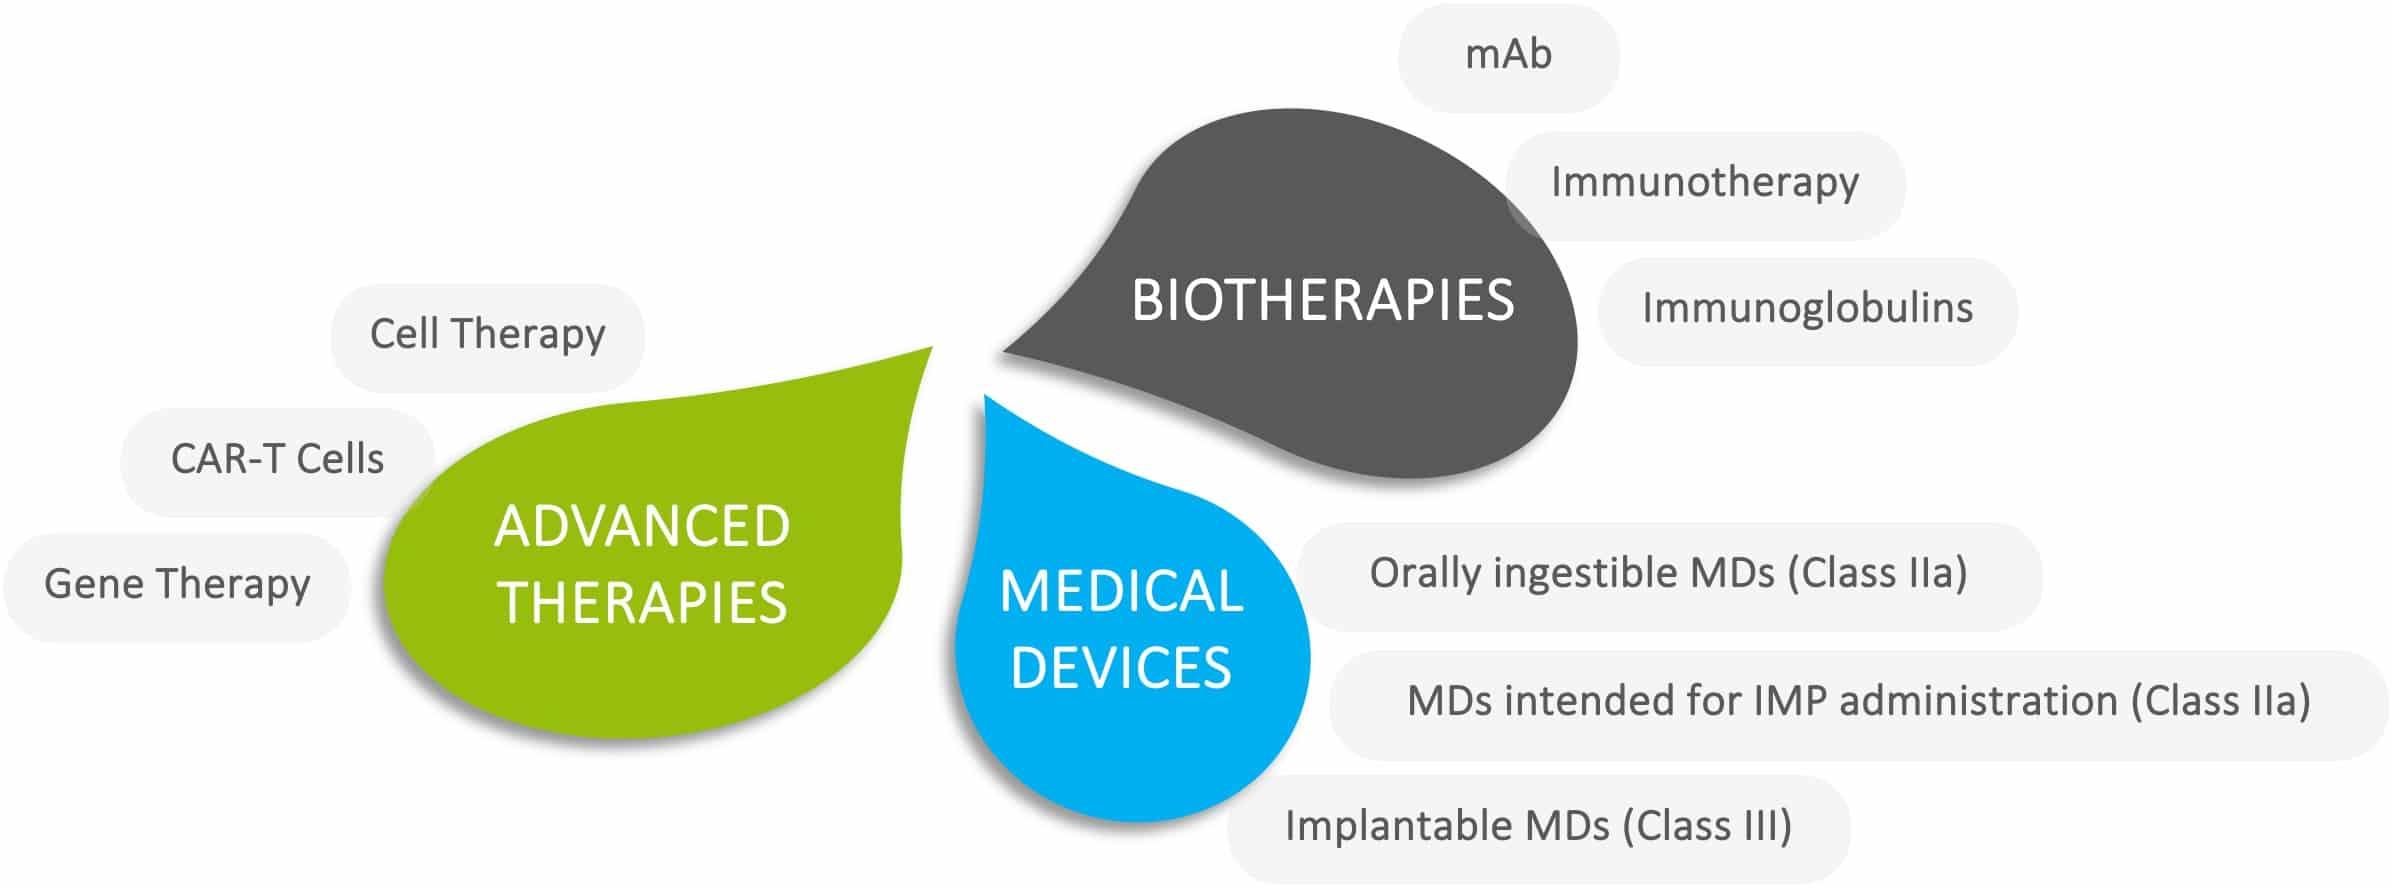 Innovative therapeutic products